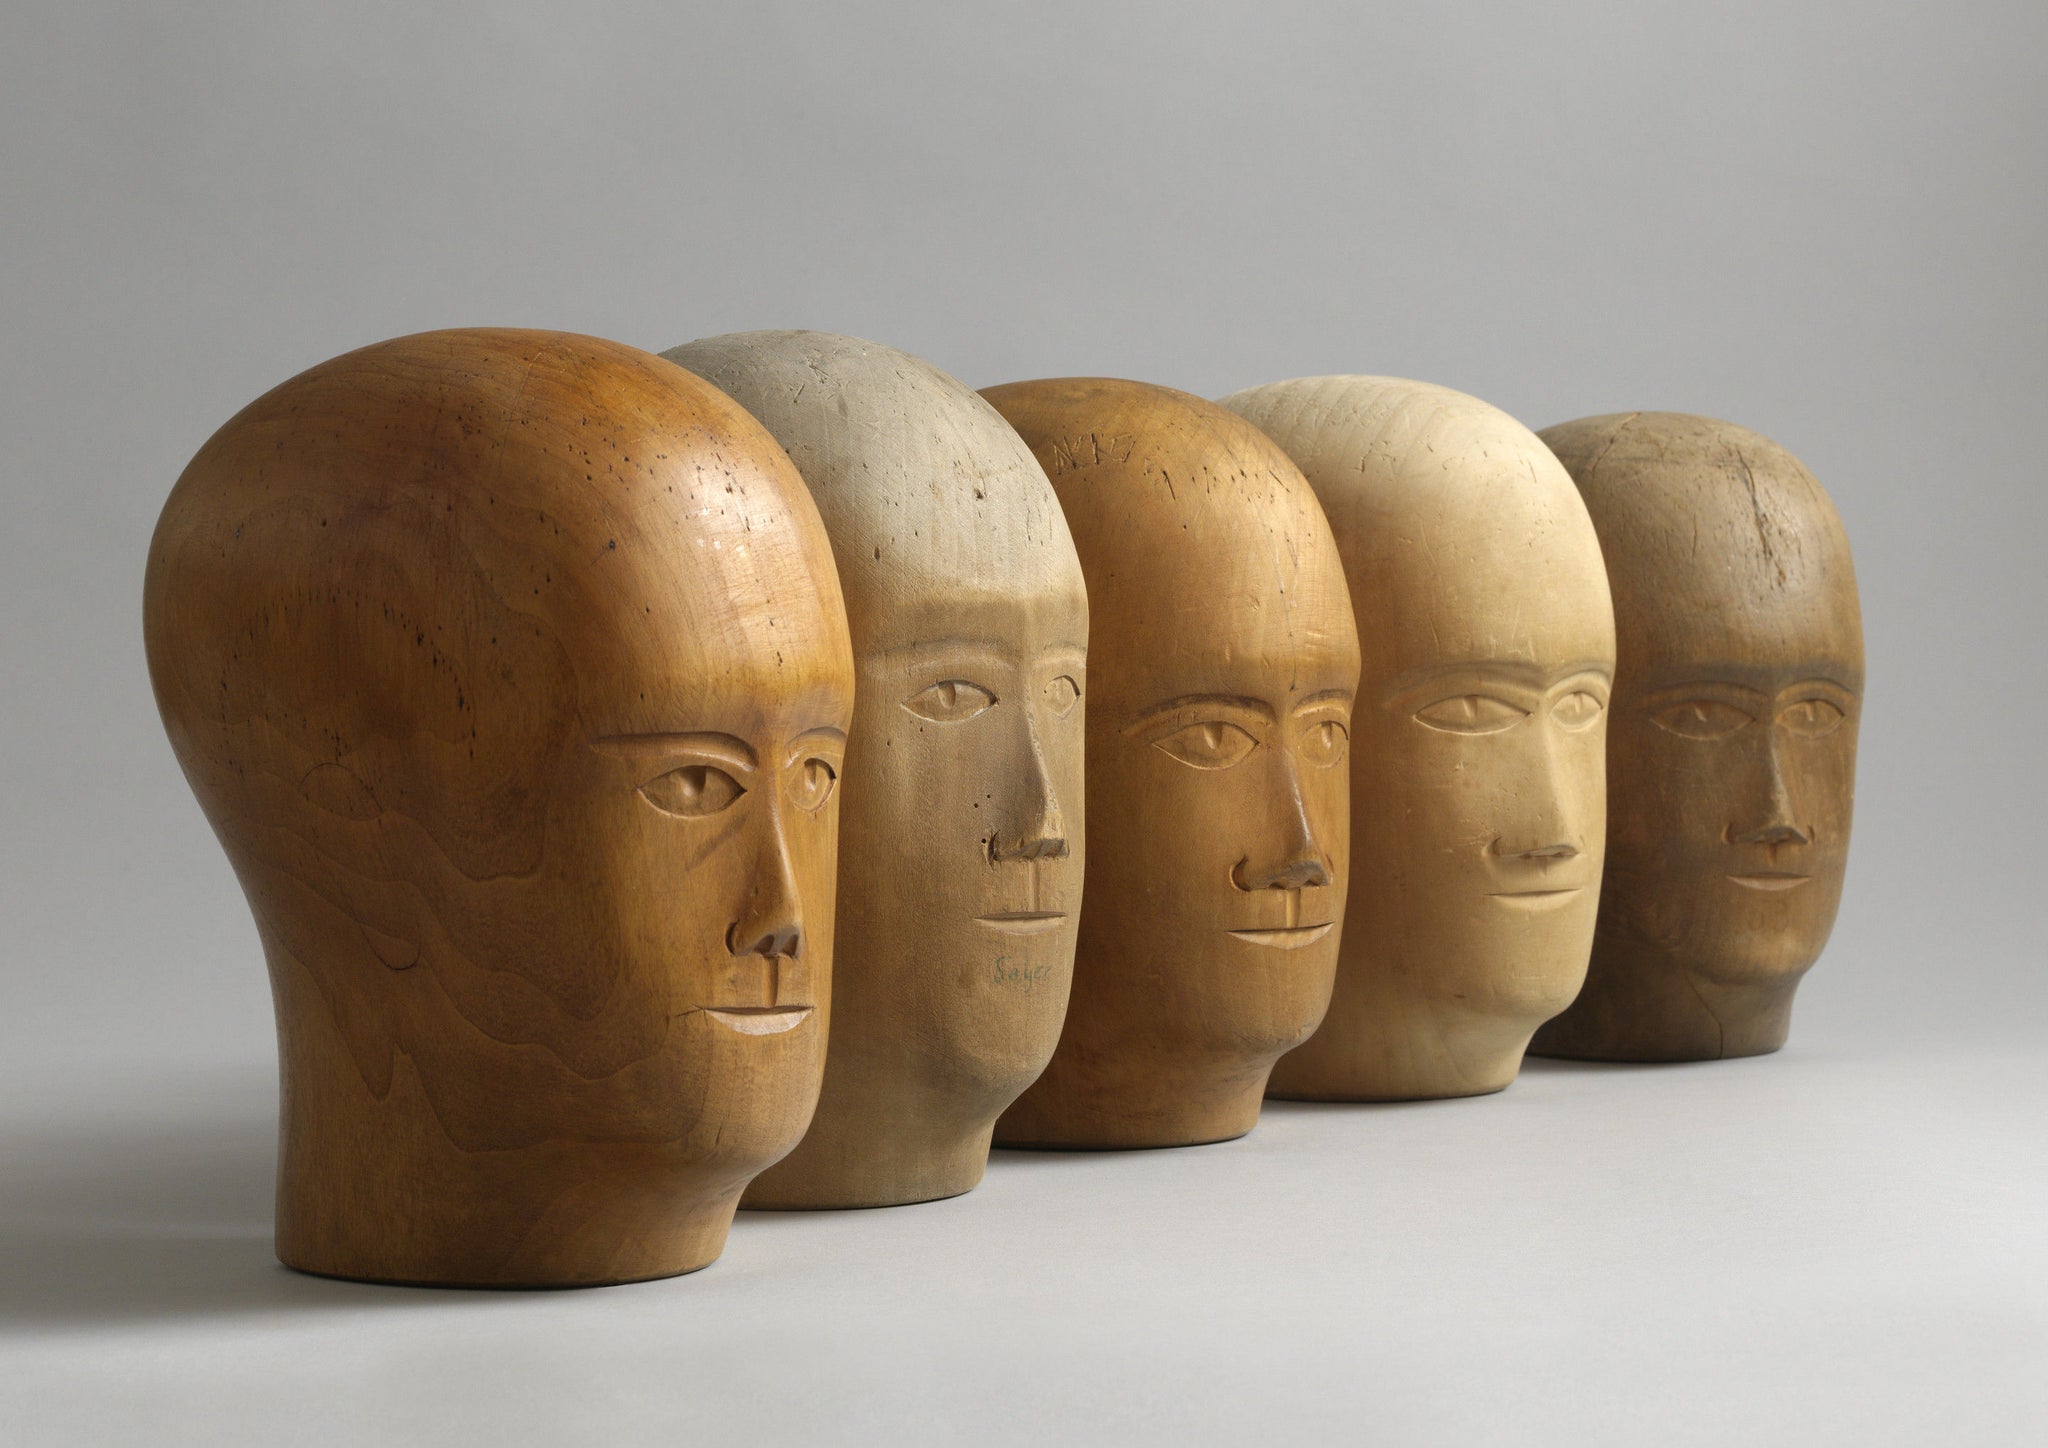 A Group of Five Head Form Milliner's Lasts